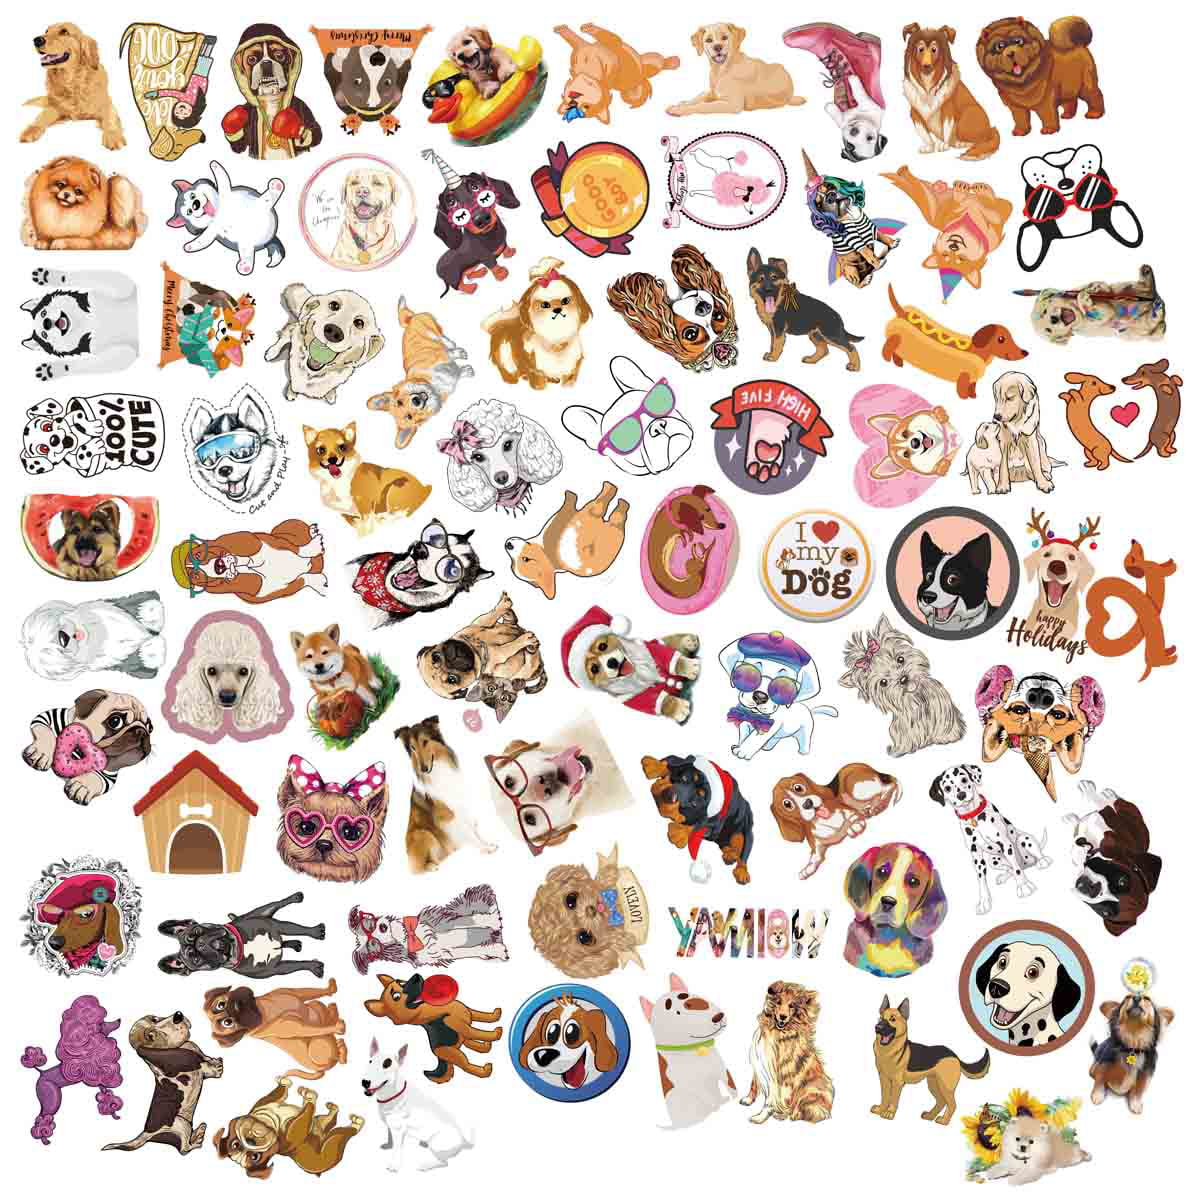 Hotsale Lovely Cartoon Cute Dog Stickers For Kids Toys Waterproof Sticker  For Notebook Skateboard Laptop Luggage Car Decals From Autoparts2006, $2.22